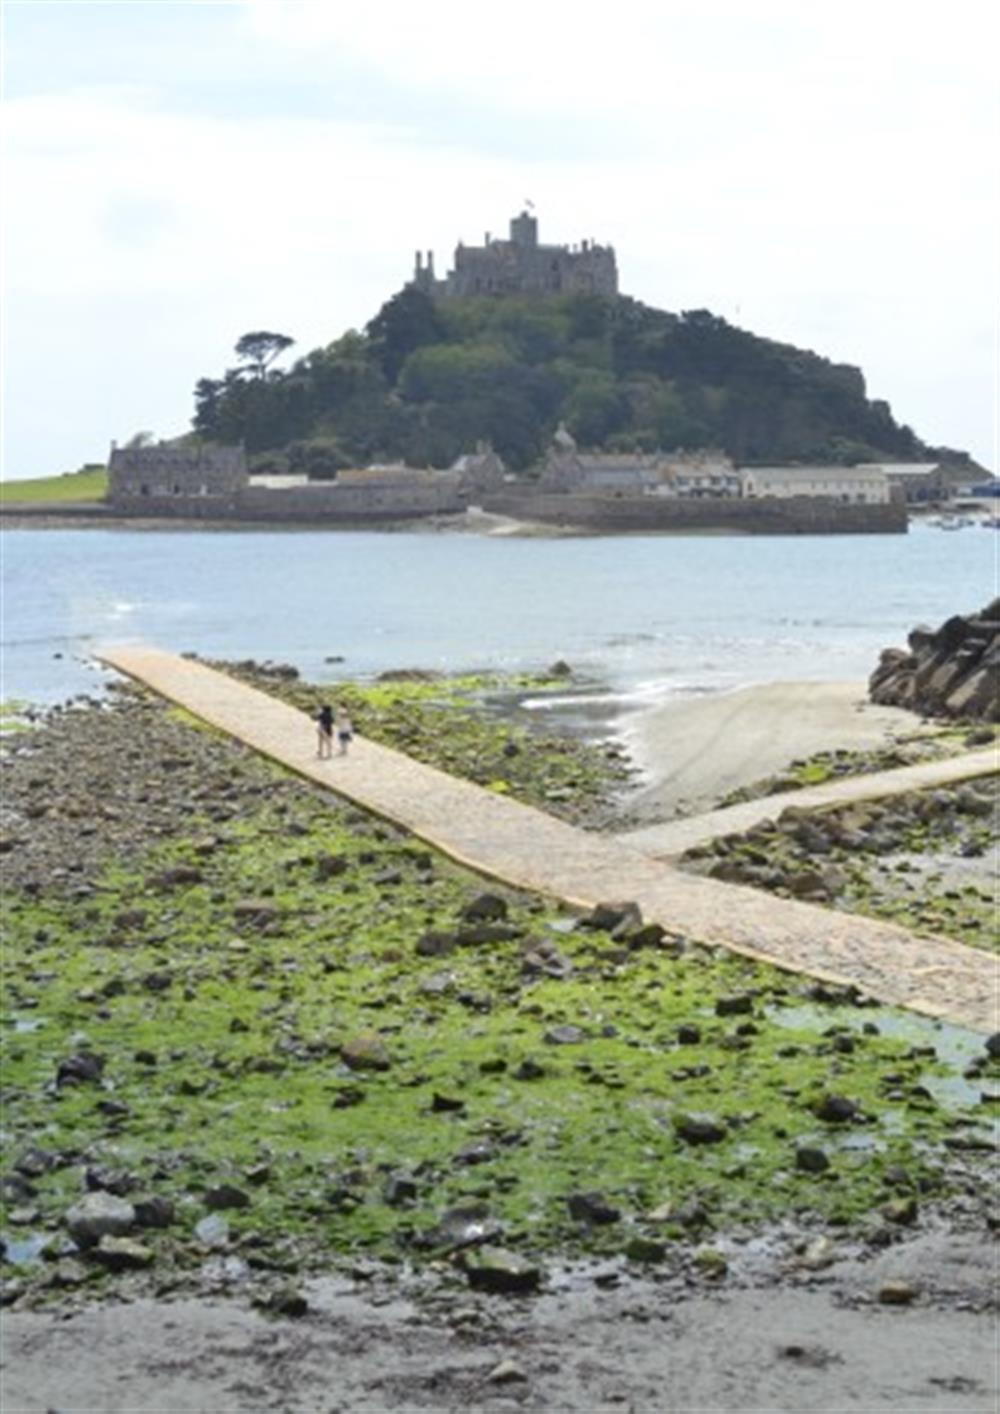 St Michael's Mount is 45 minutes away.